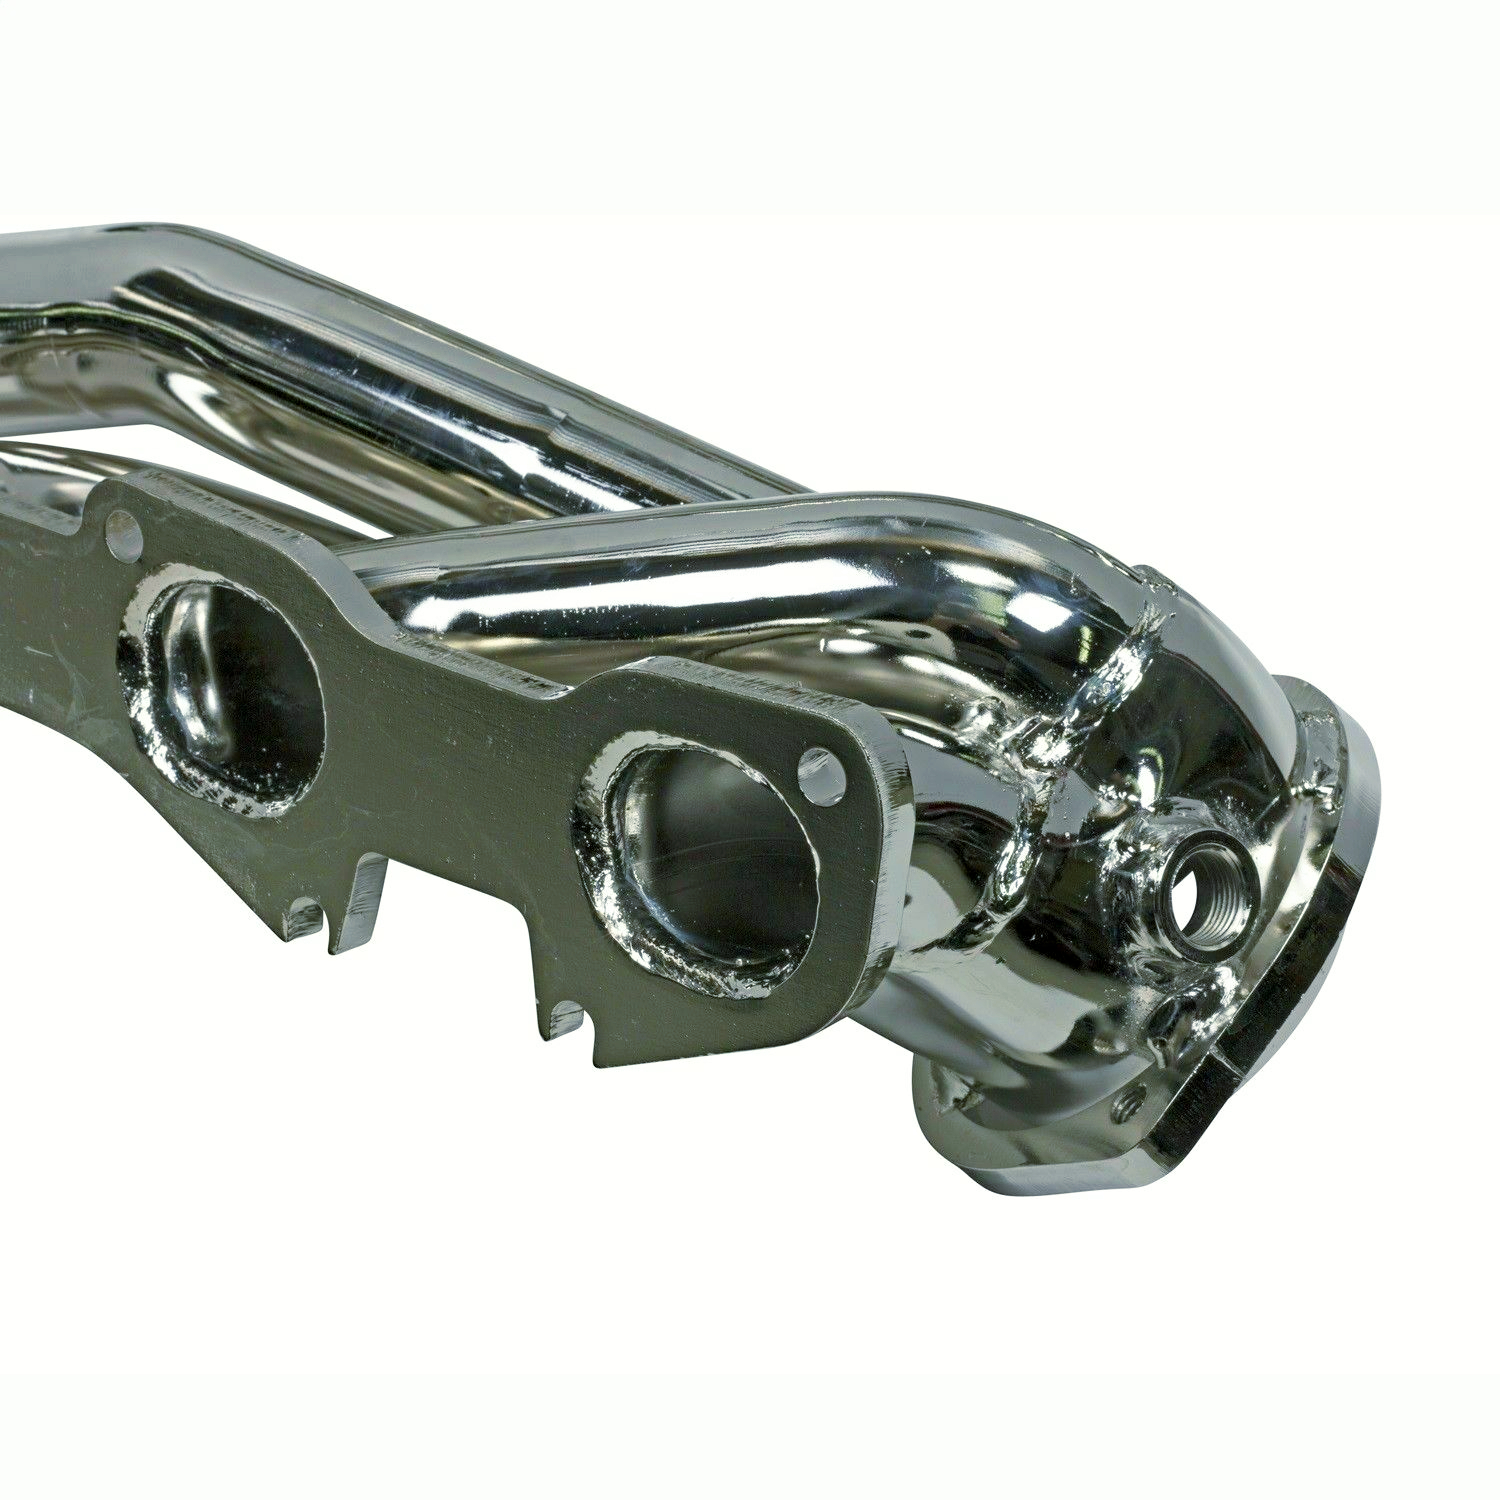 Headers Exhaust Manifold For 09-18 Dodge Ram 1500 Headers Exhaust Shorty Hemi Manifold Stainless 5.7L